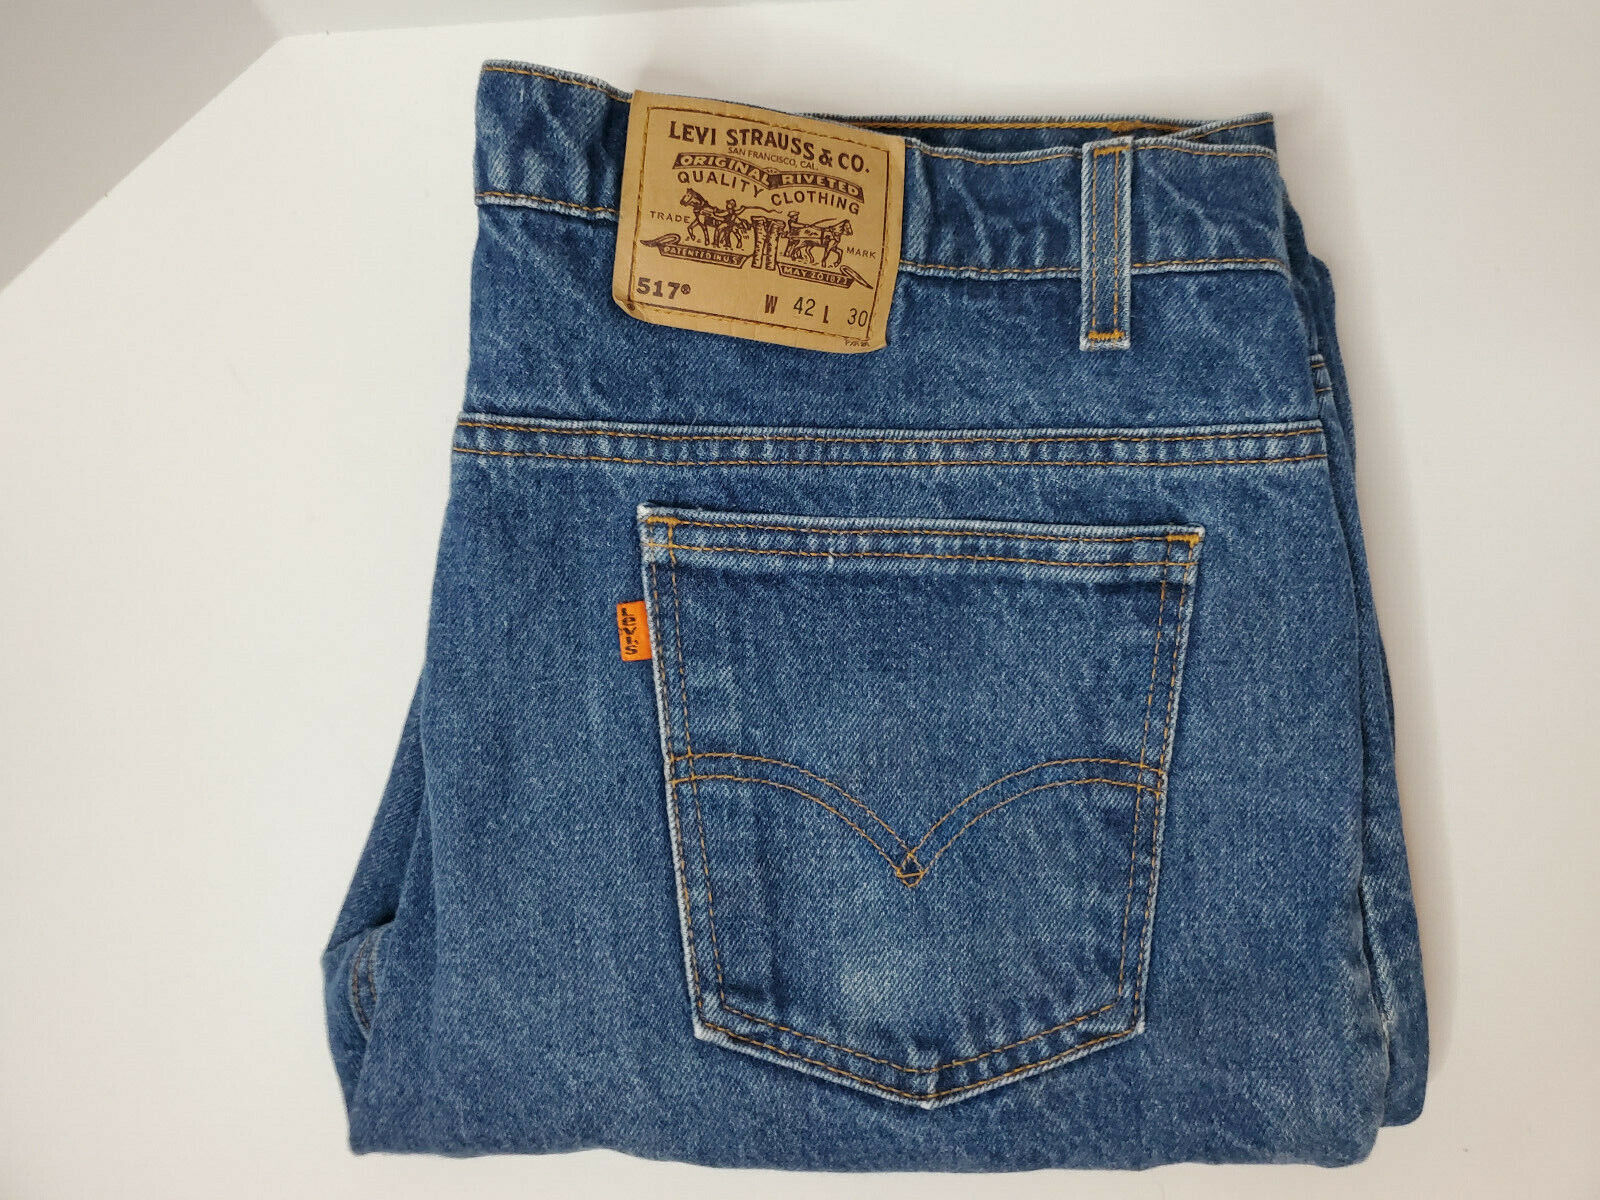 Vintage Levis 517 Orange Tab Bootcut Jeans 42 x 30 Fit 41 x 30 Made in USA